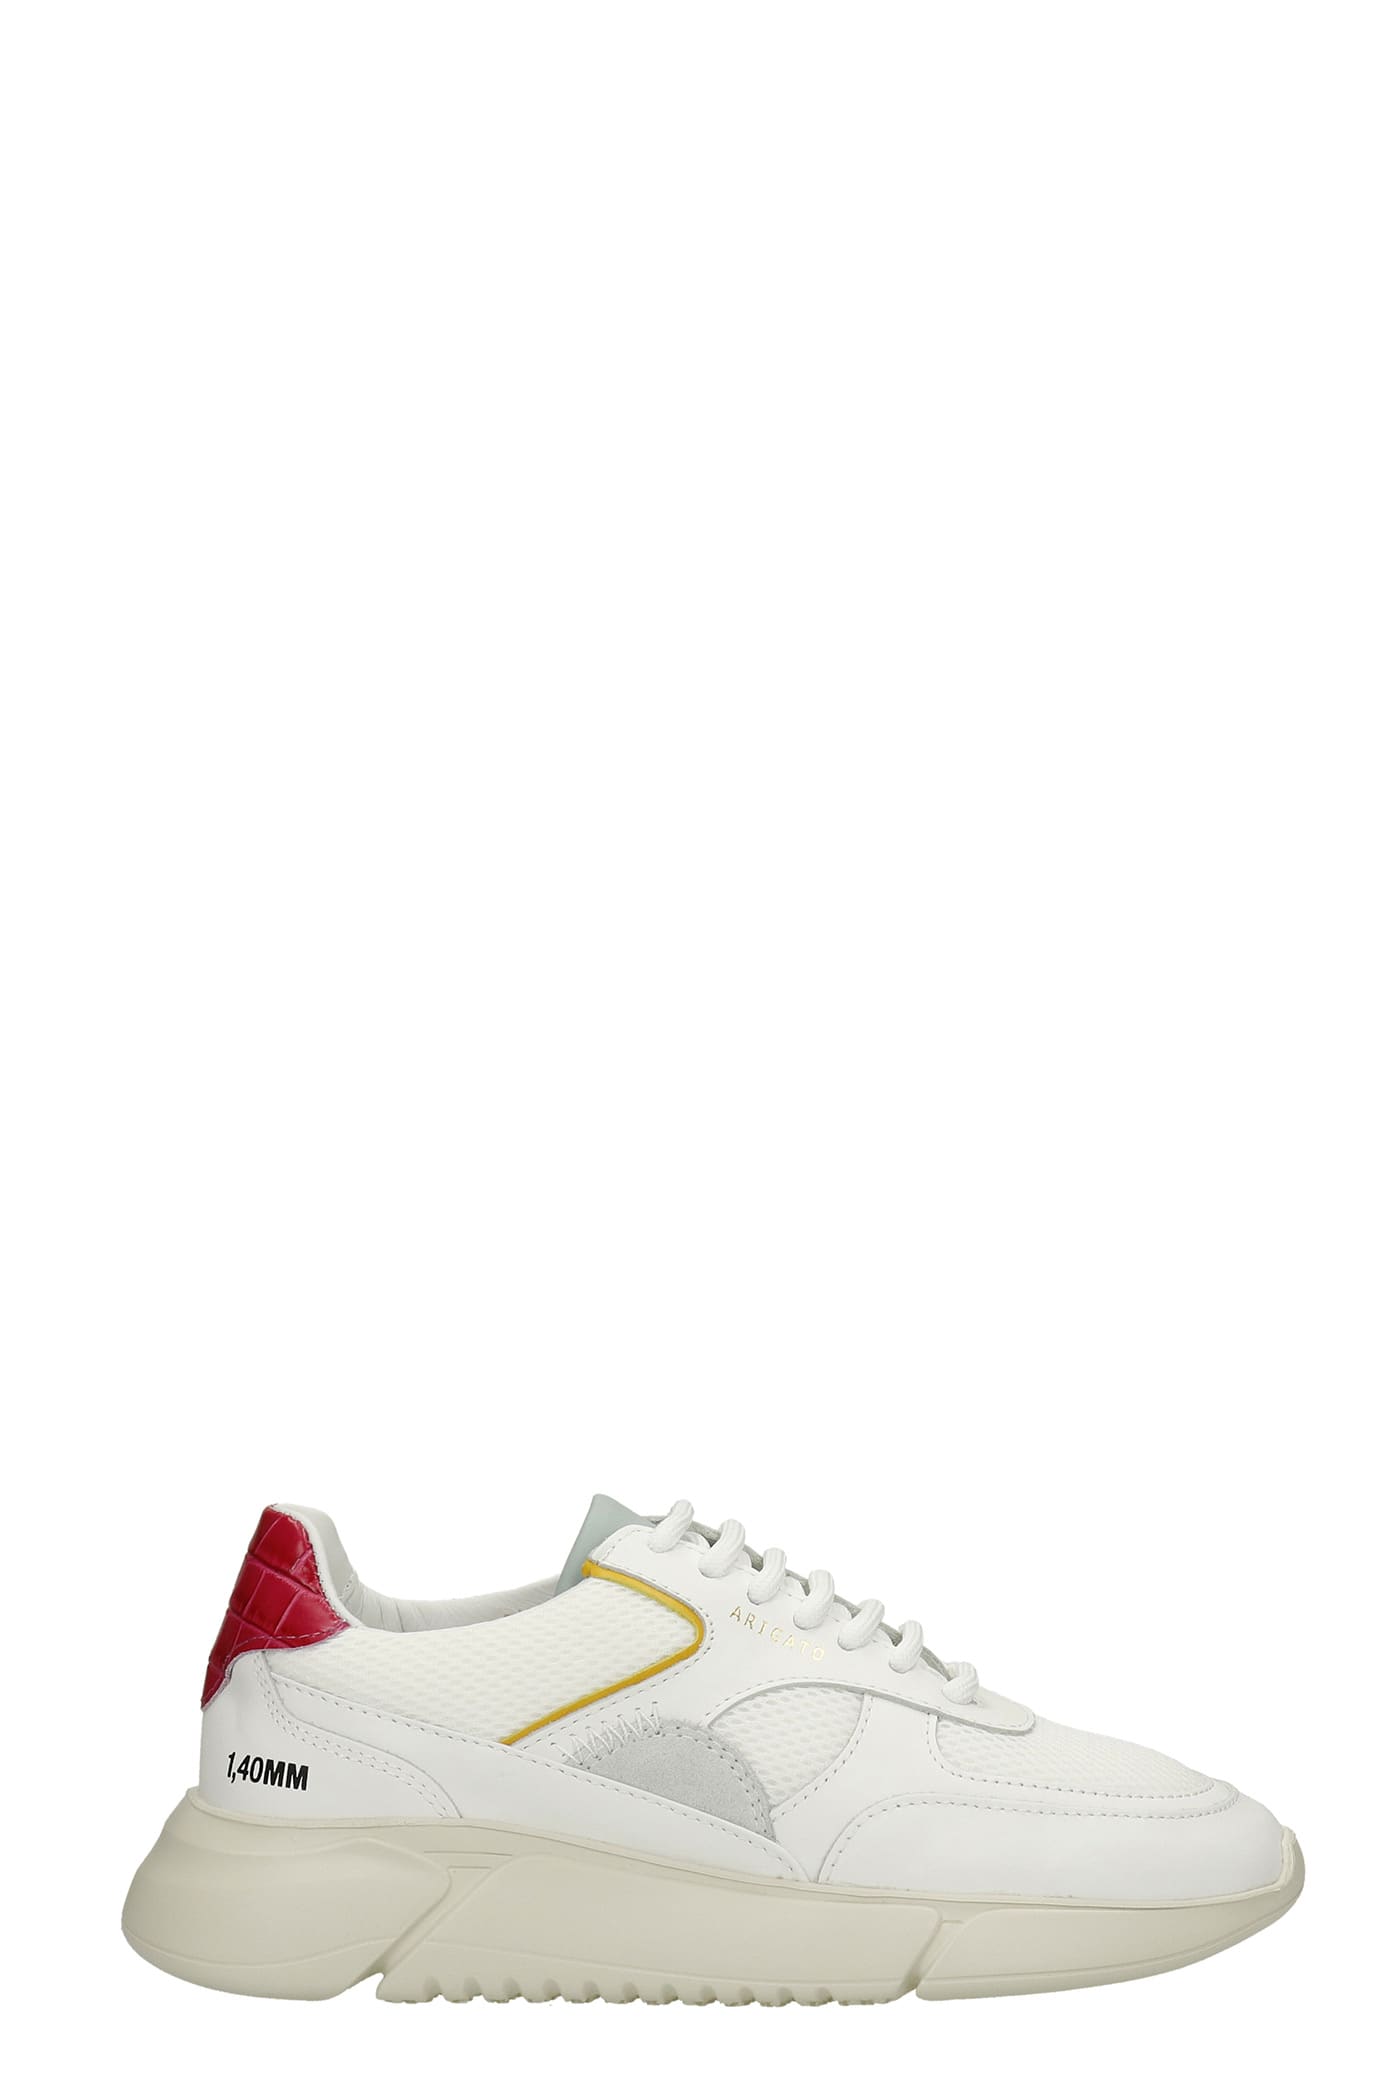 Axel Arigato Genesis Sneakers In White Leather